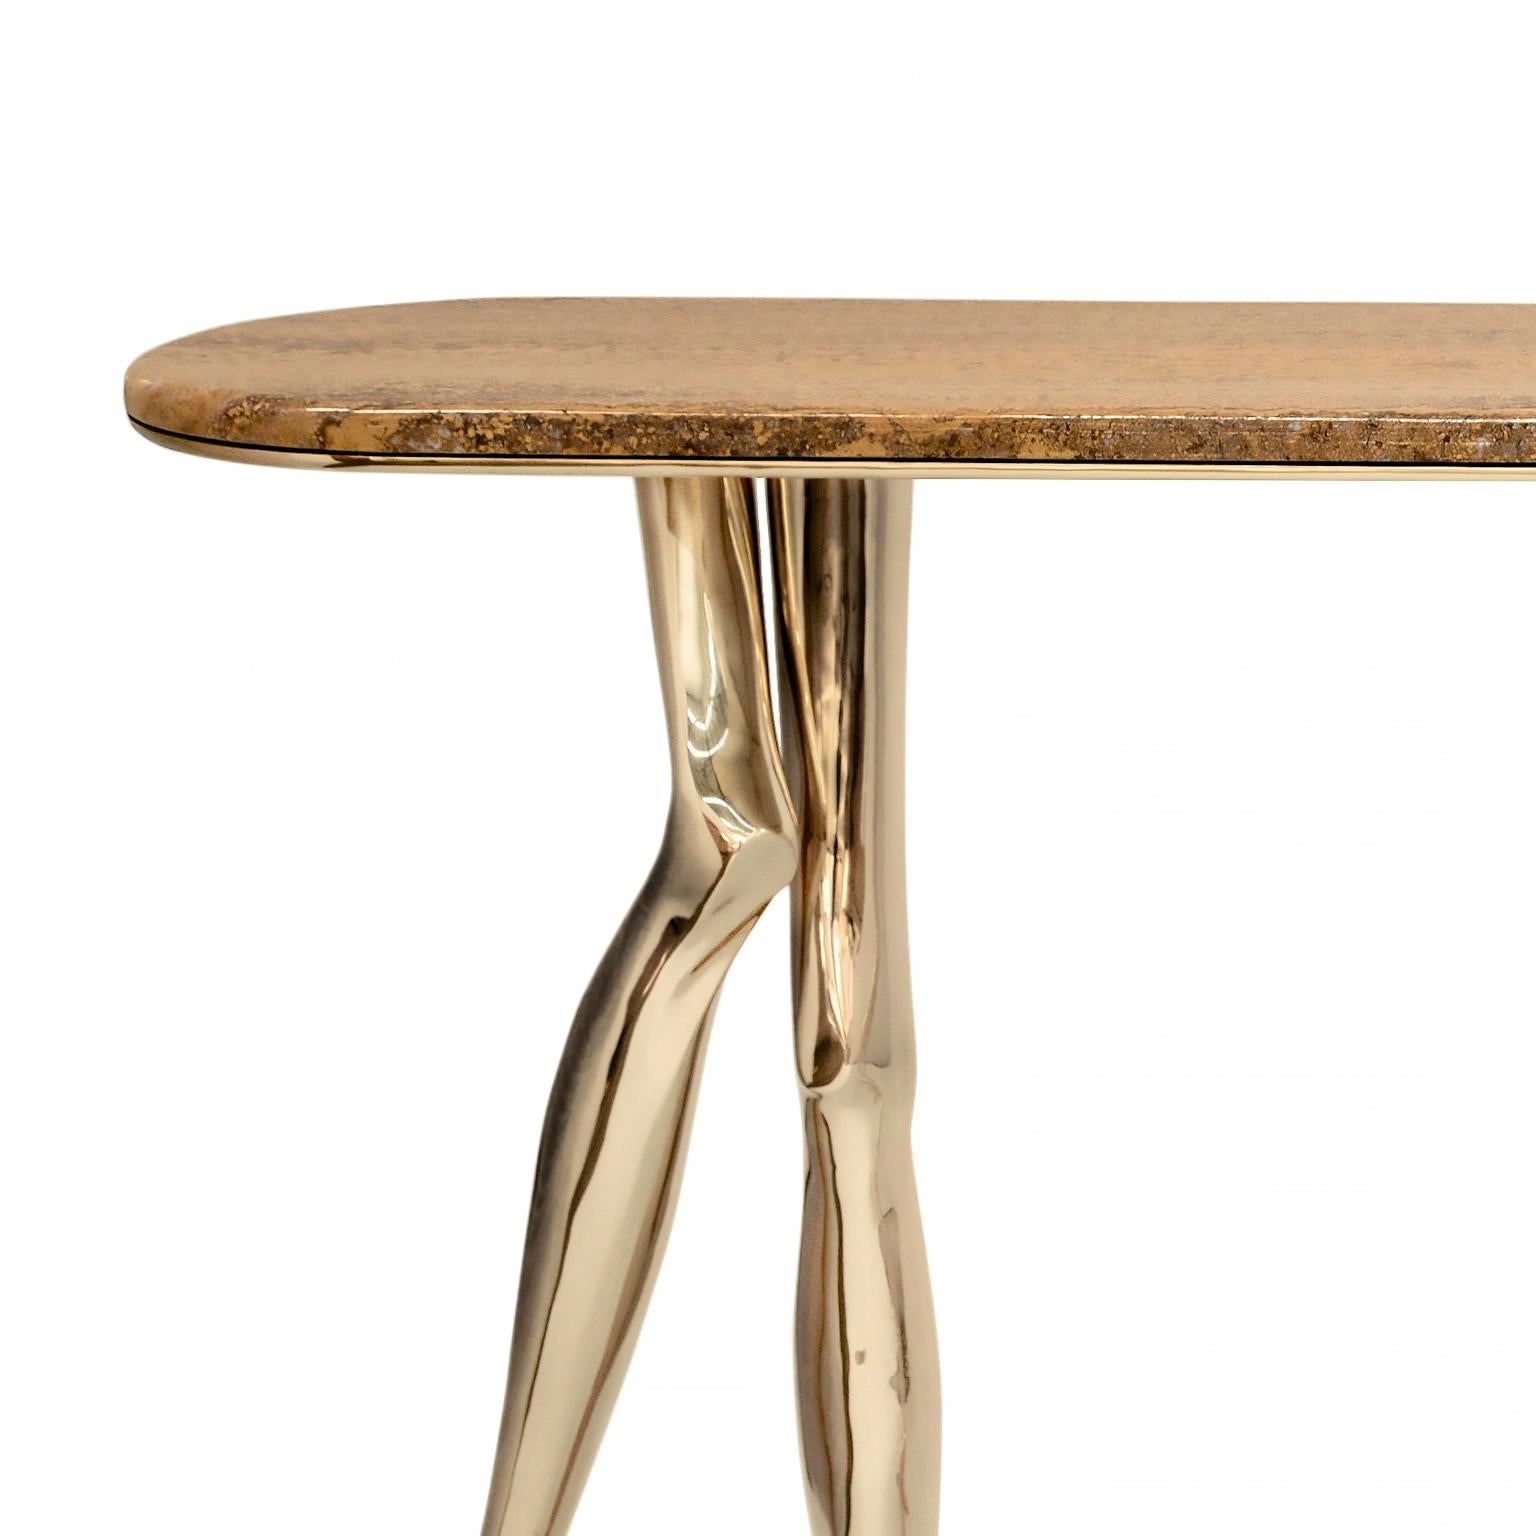 Cast Modern Monroe Console Table in Polished Brass and Yellow Travertine Marble For Sale